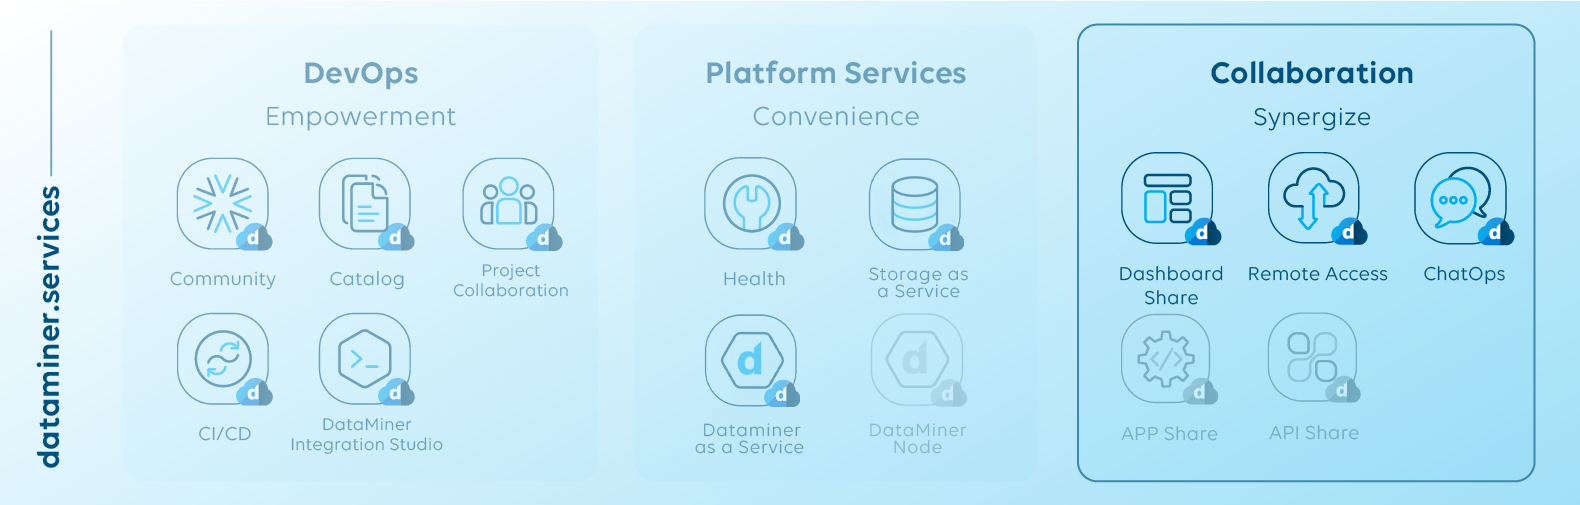 dataminer.services.categories